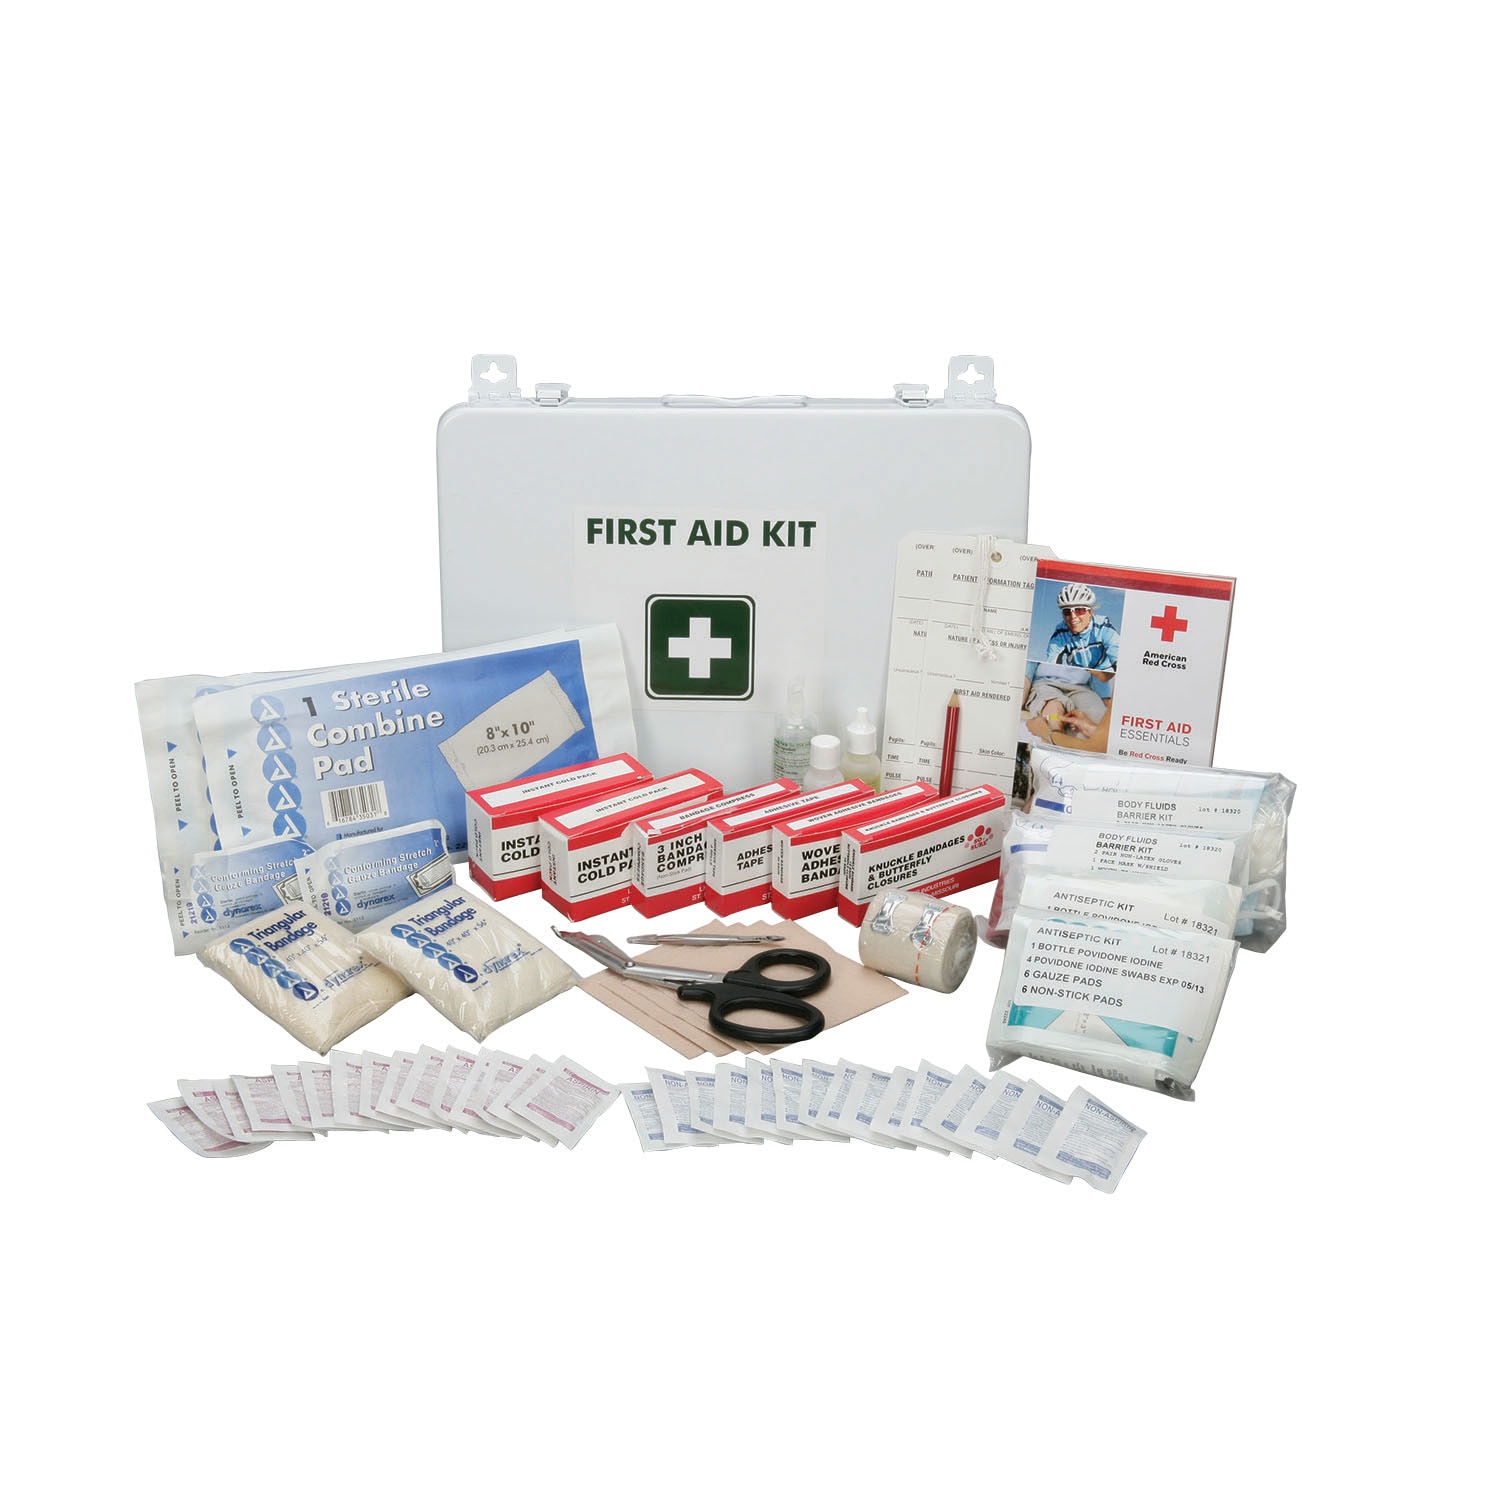 Kit, First Aid, Industrial/Construction Use, Metal Box, 10\" x 14-1/2\" x 2-3/4\"